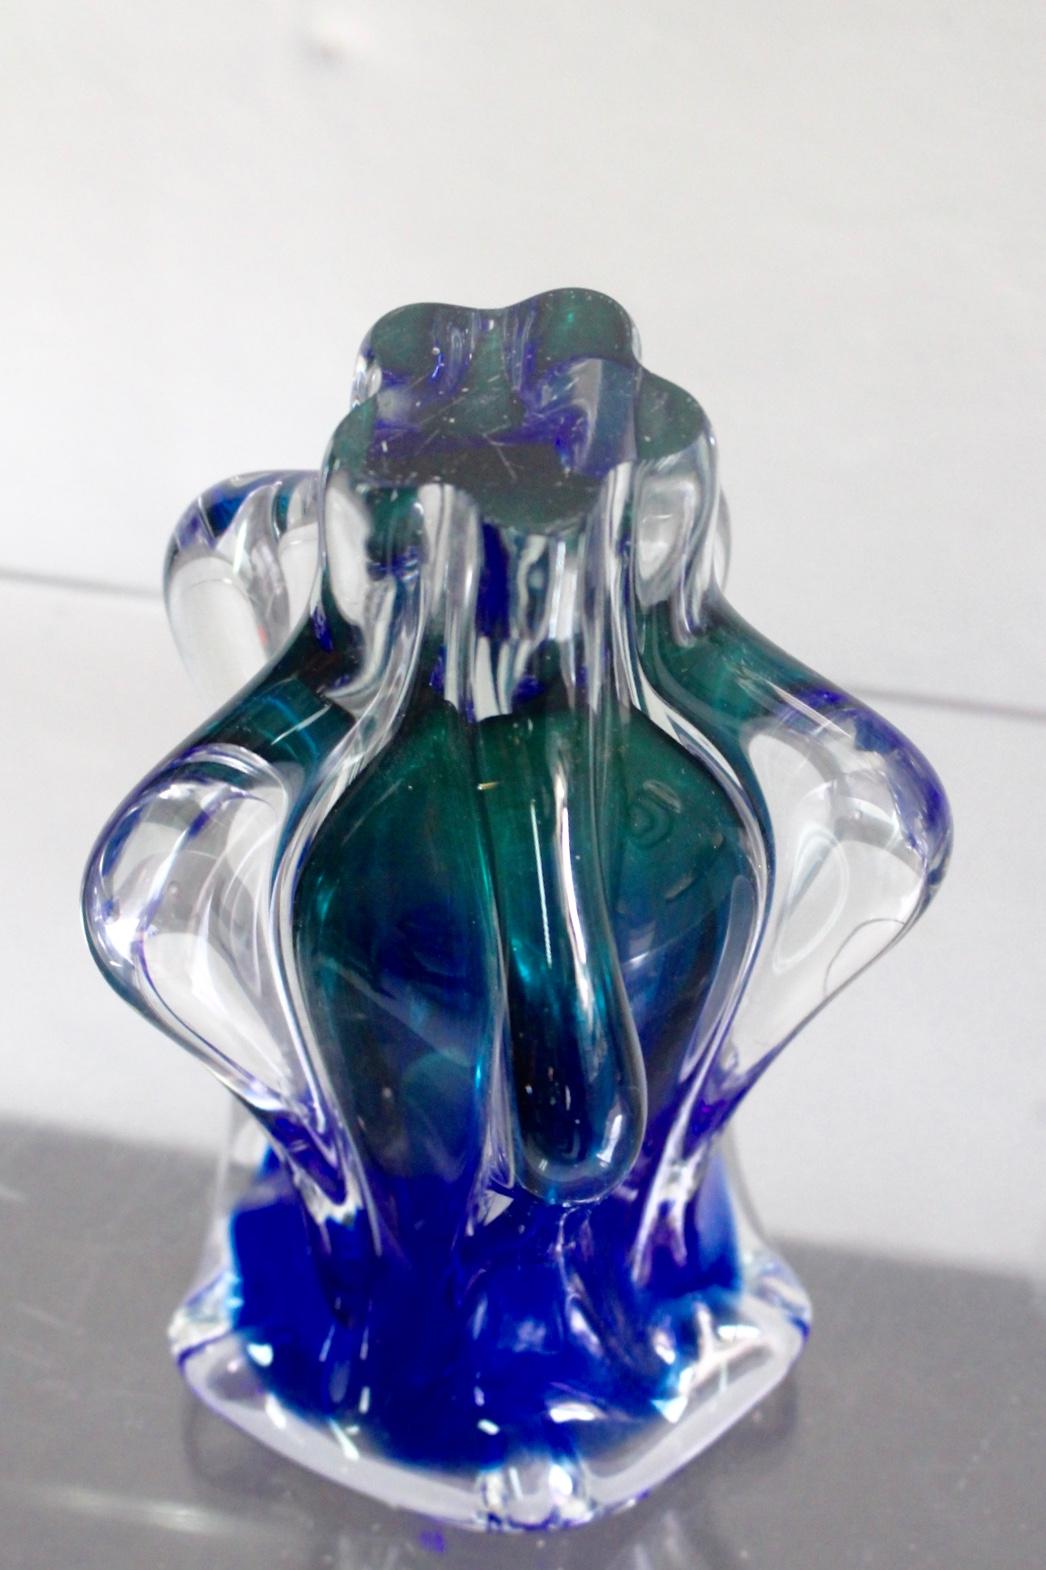 Mid-20th Century Midcentury Murano Blue and Green Italian Sommerso Glass Vase, 1960s For Sale